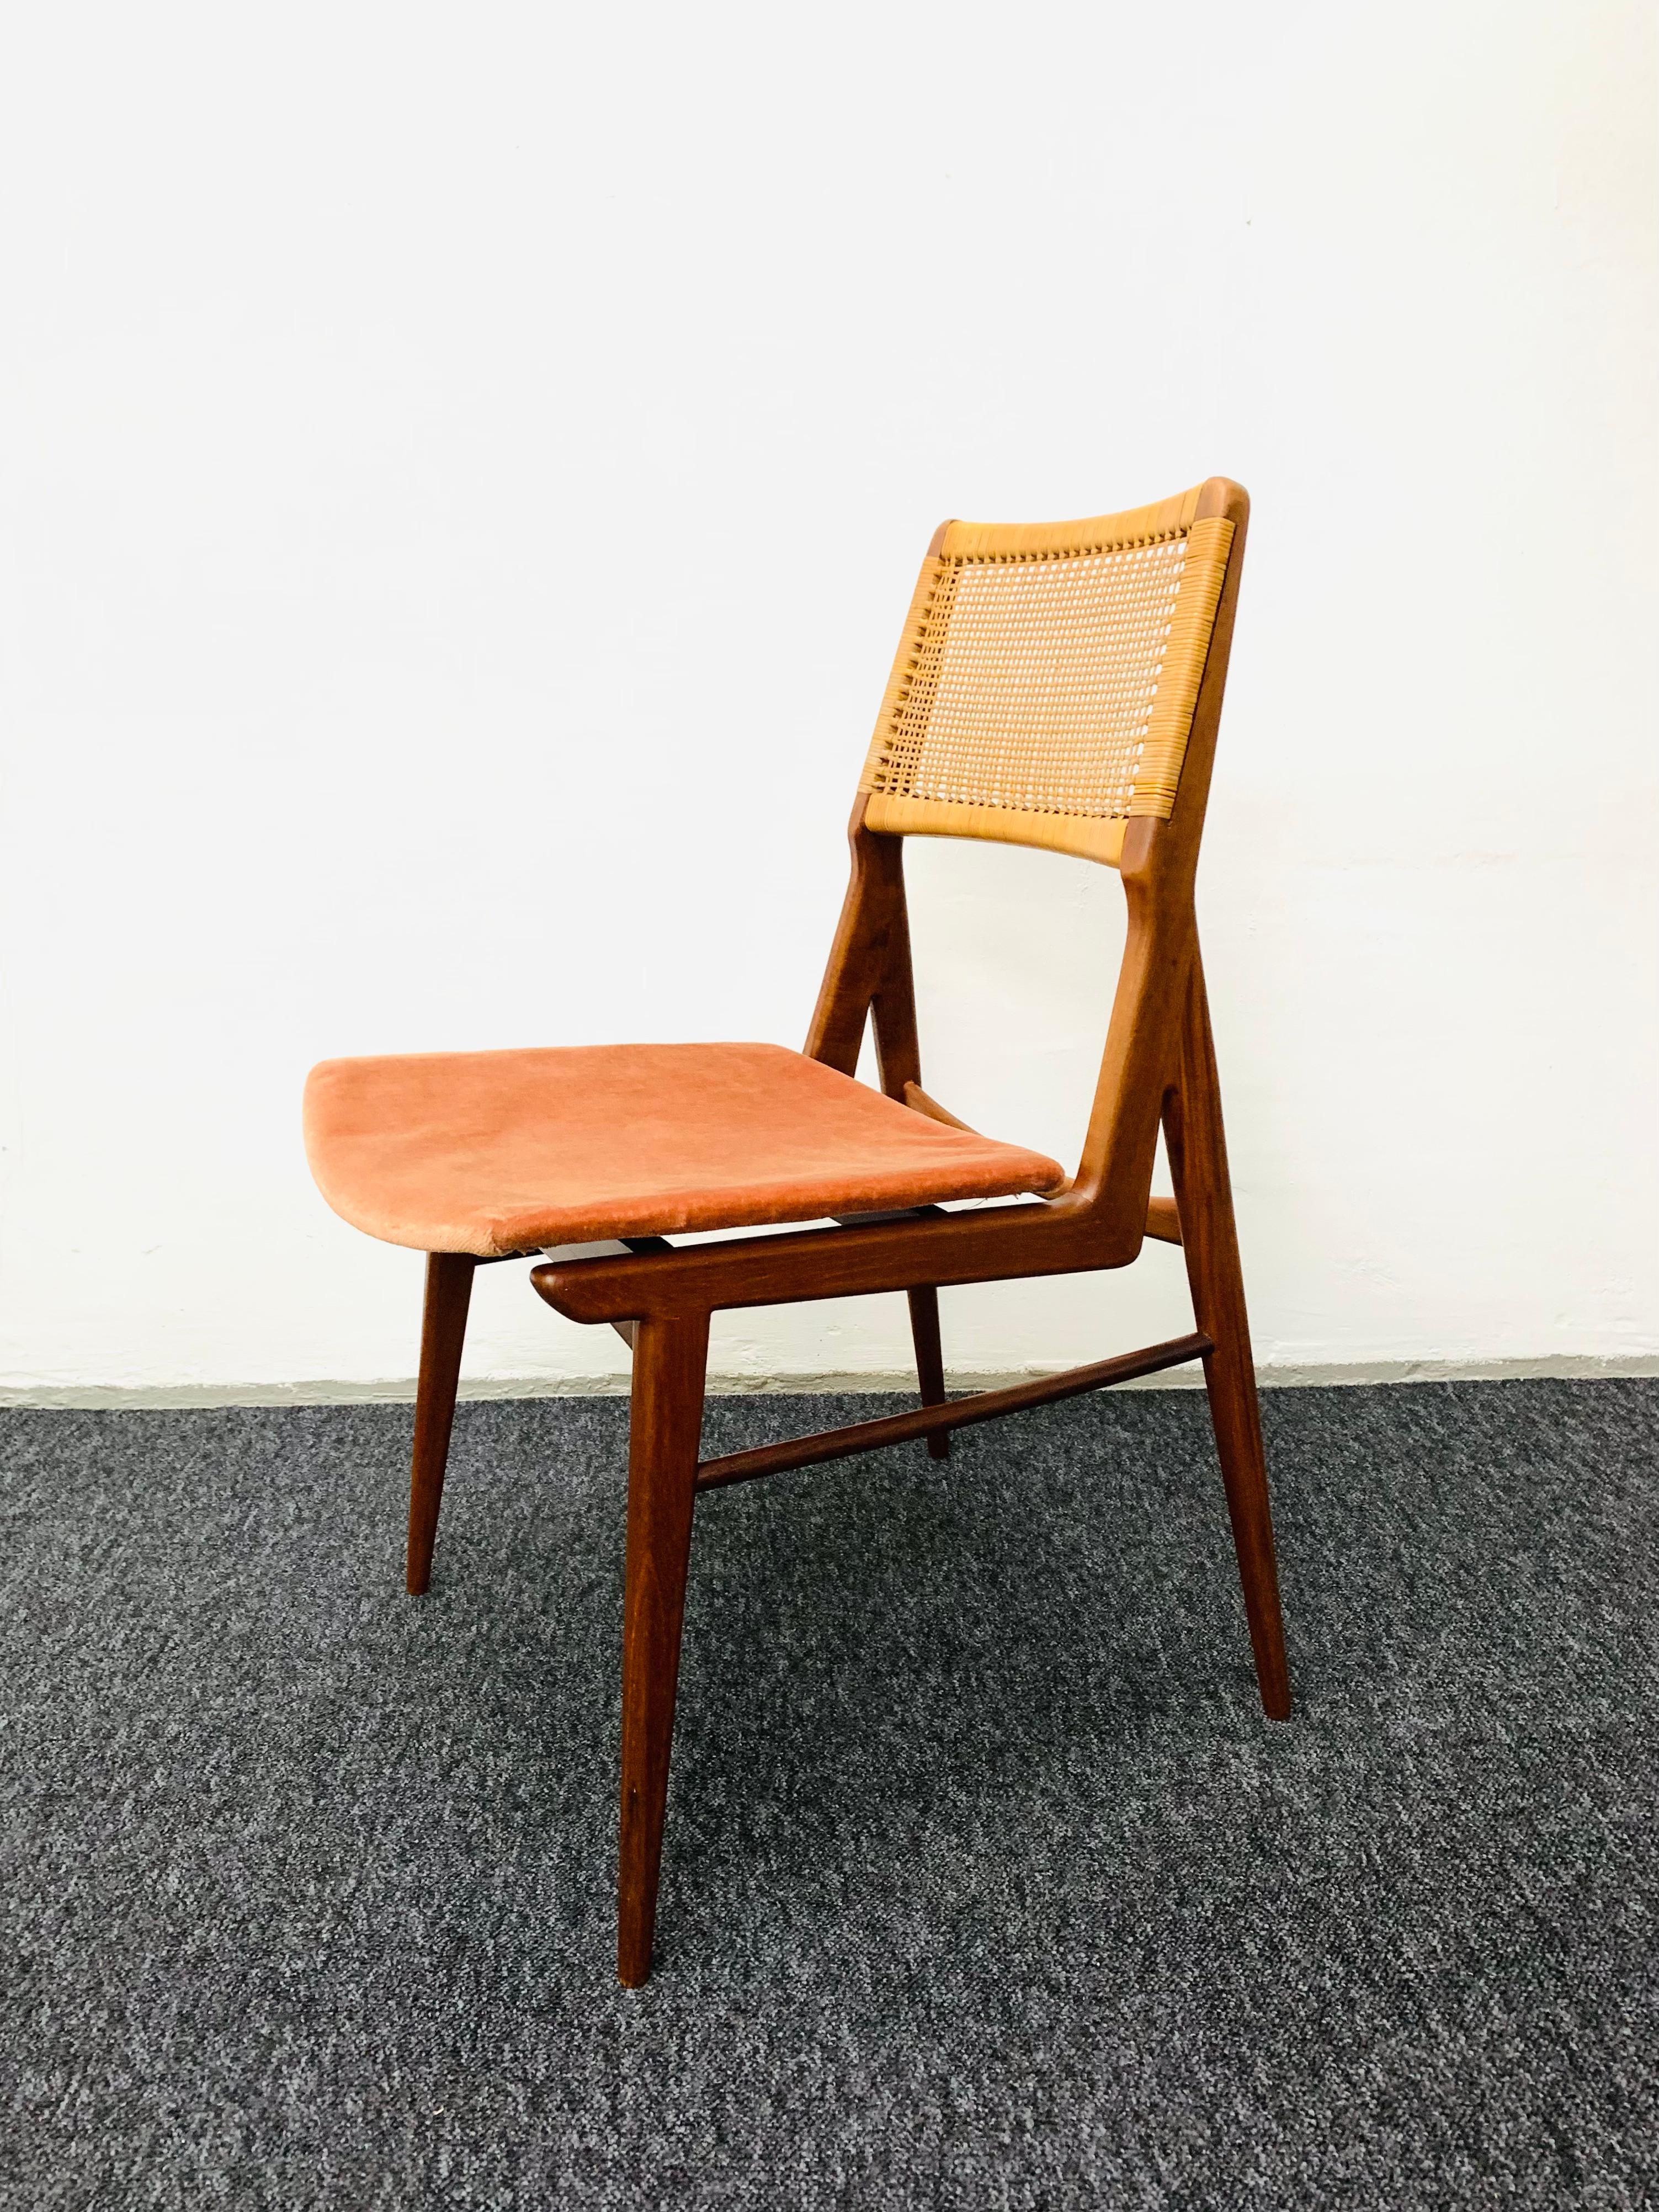 Mid-20th Century Set of 6 Beautiful Teakwood Dining Chairs For Sale